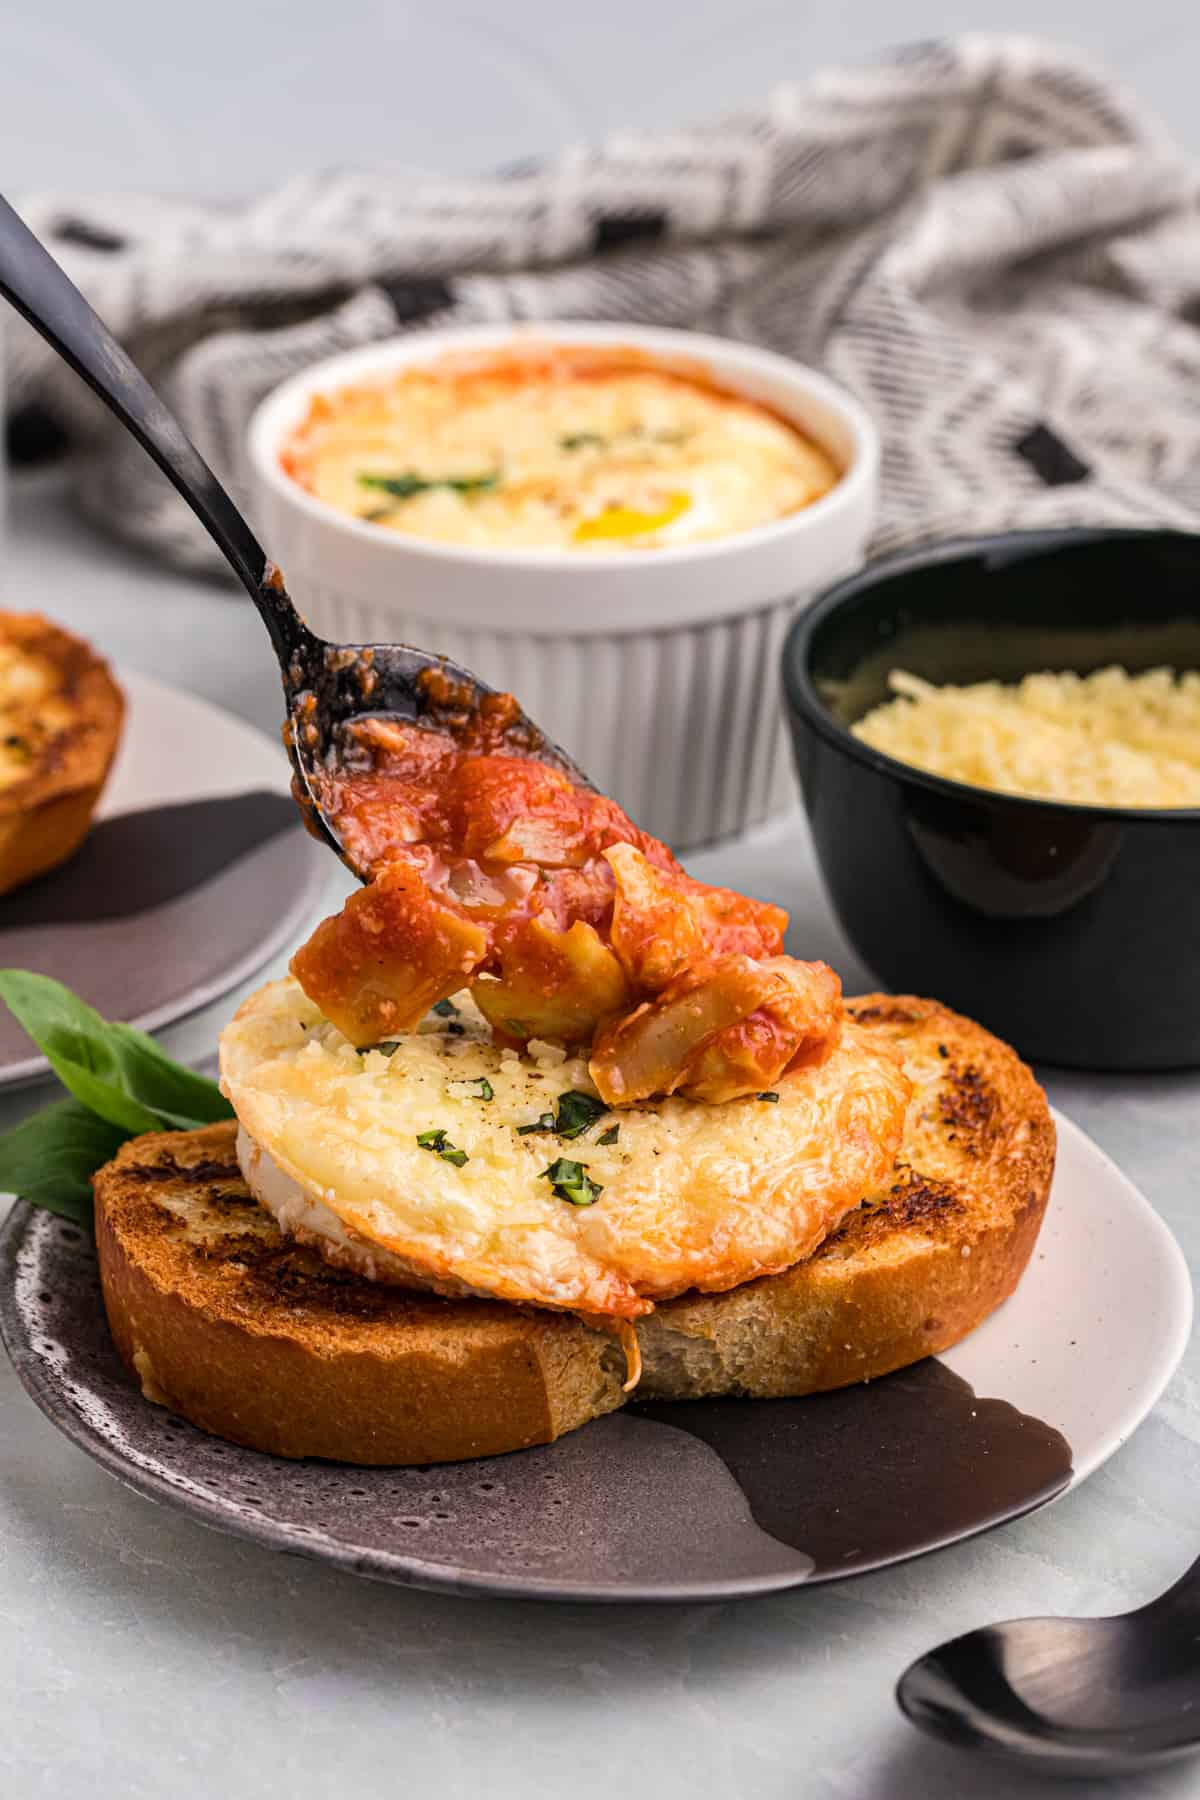 Baked eggs on a piece of toast being topped with tomato sauce.